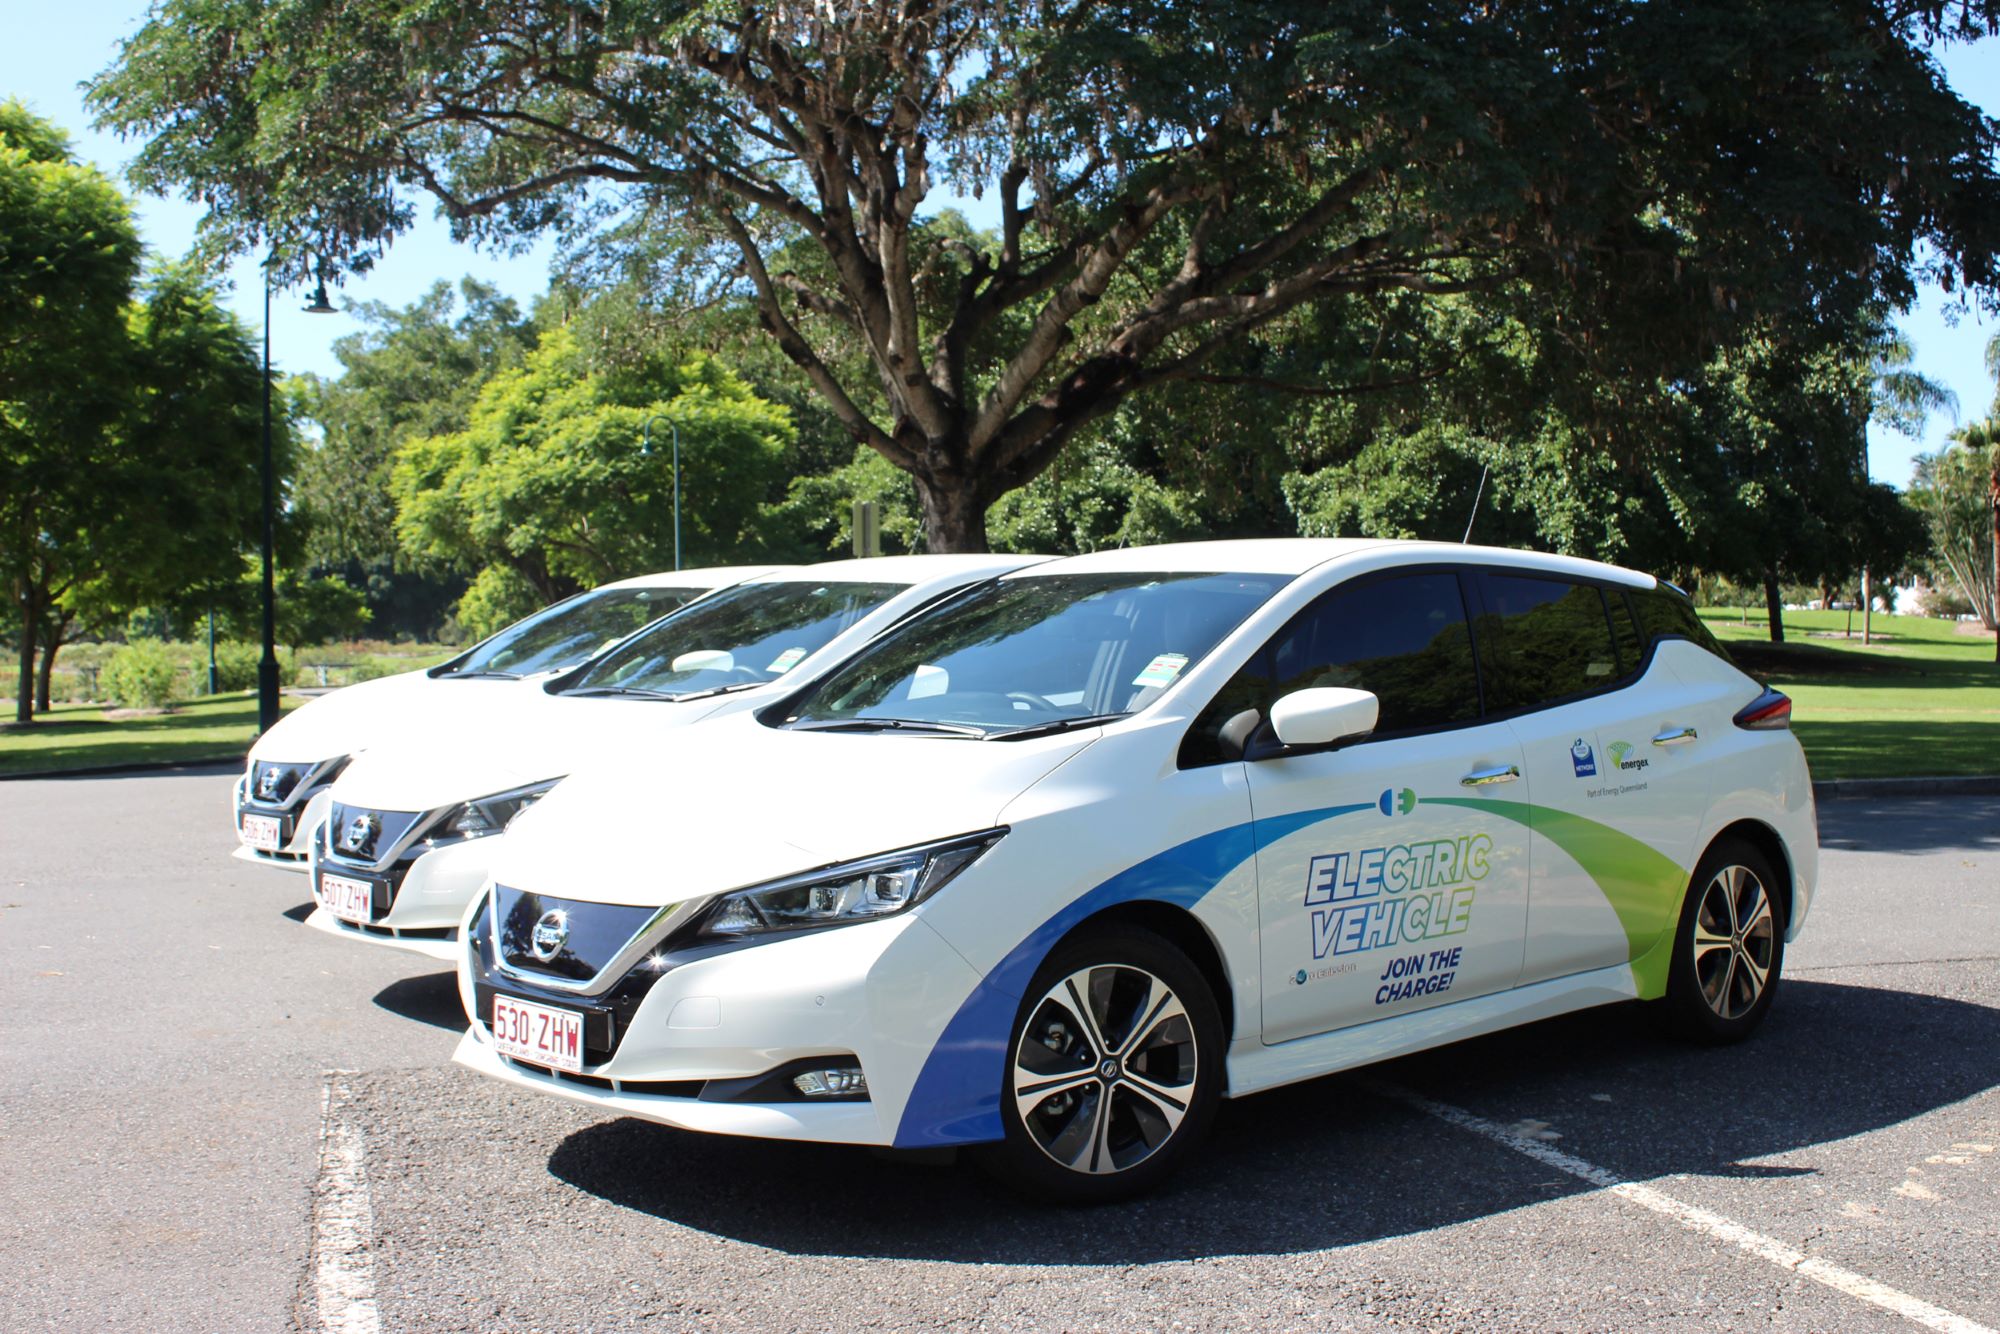 3 branded EVs lined up in a car park